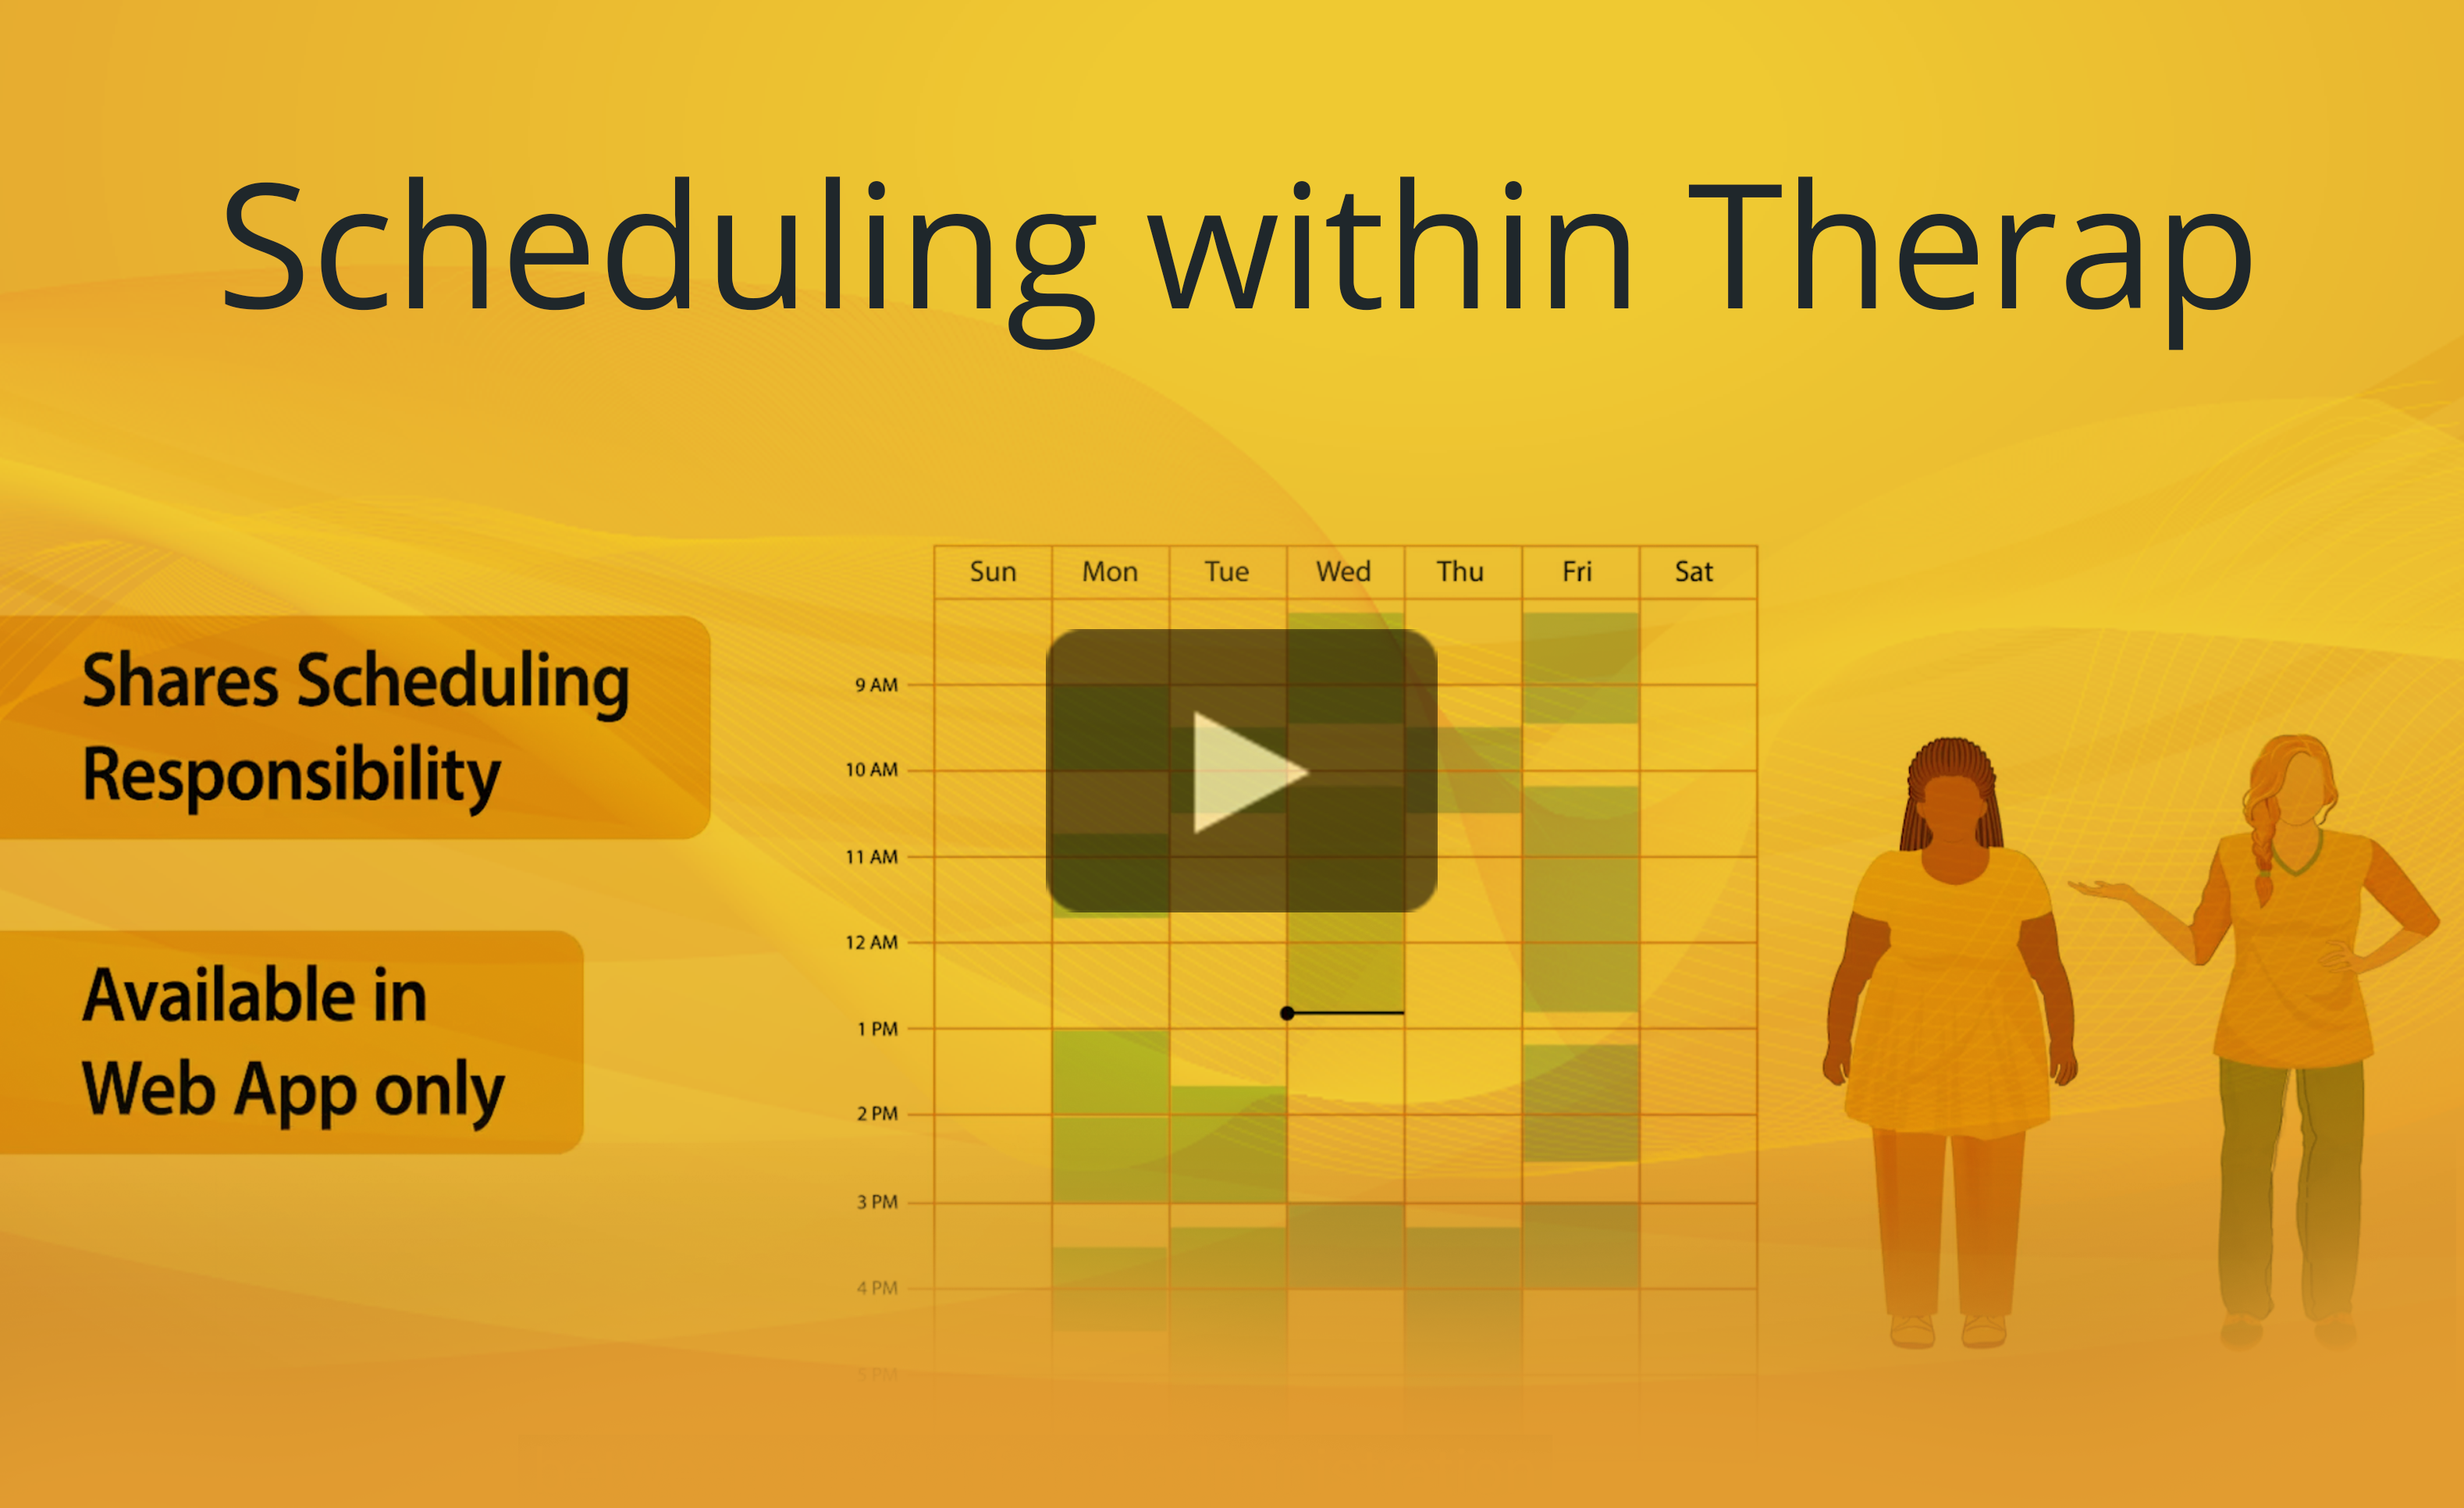 Scheduling within Therap